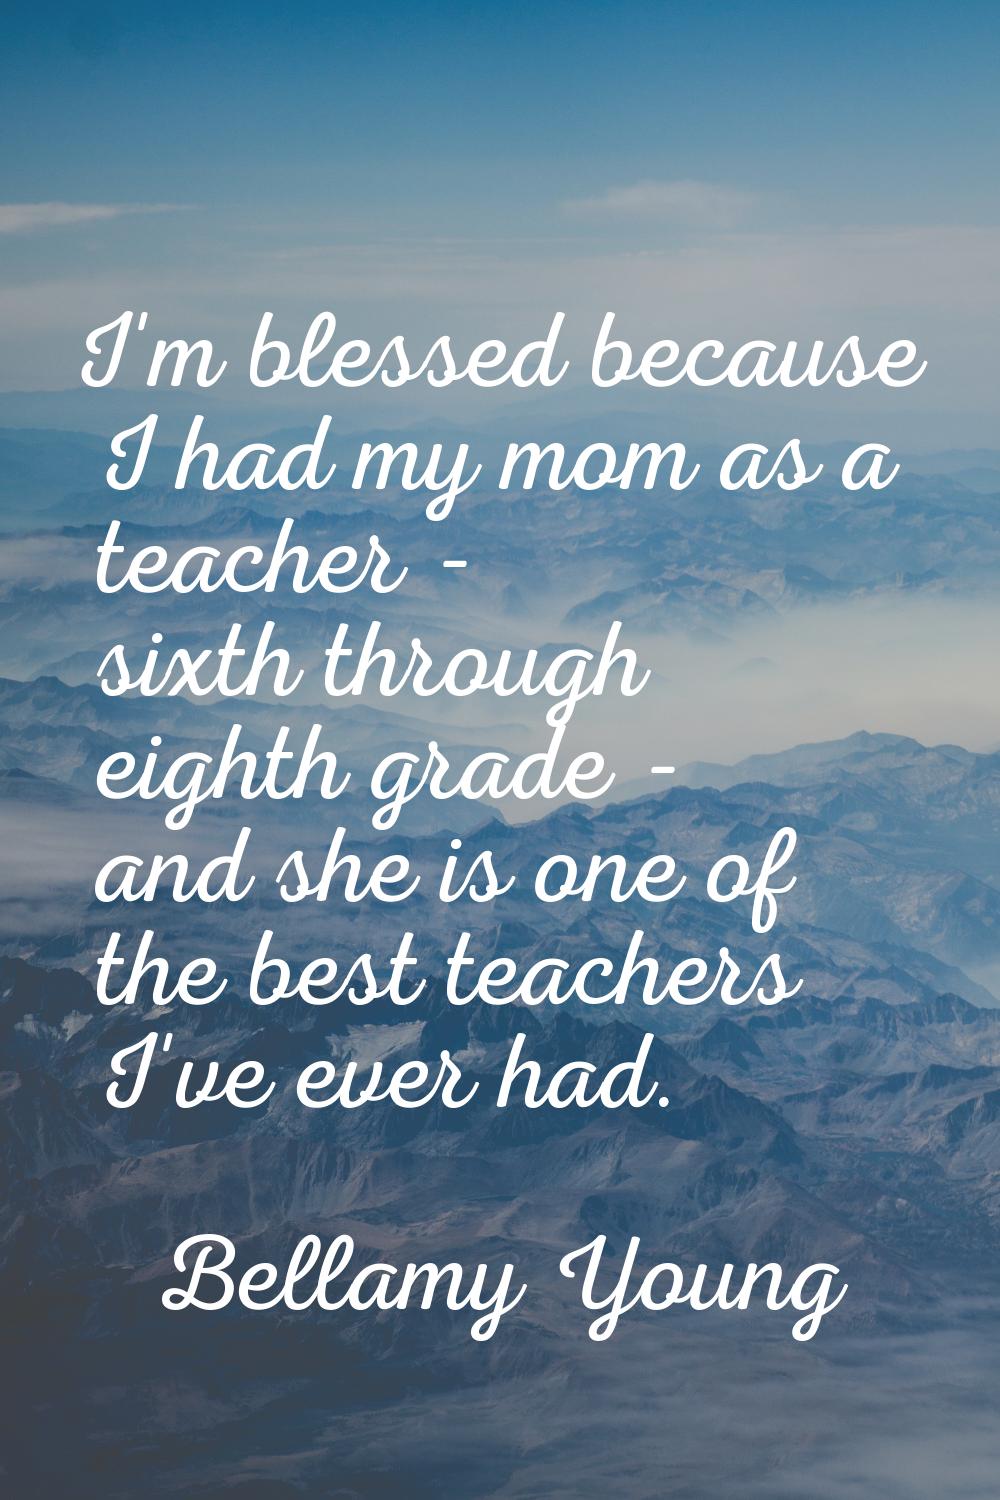 I'm blessed because I had my mom as a teacher - sixth through eighth grade - and she is one of the 